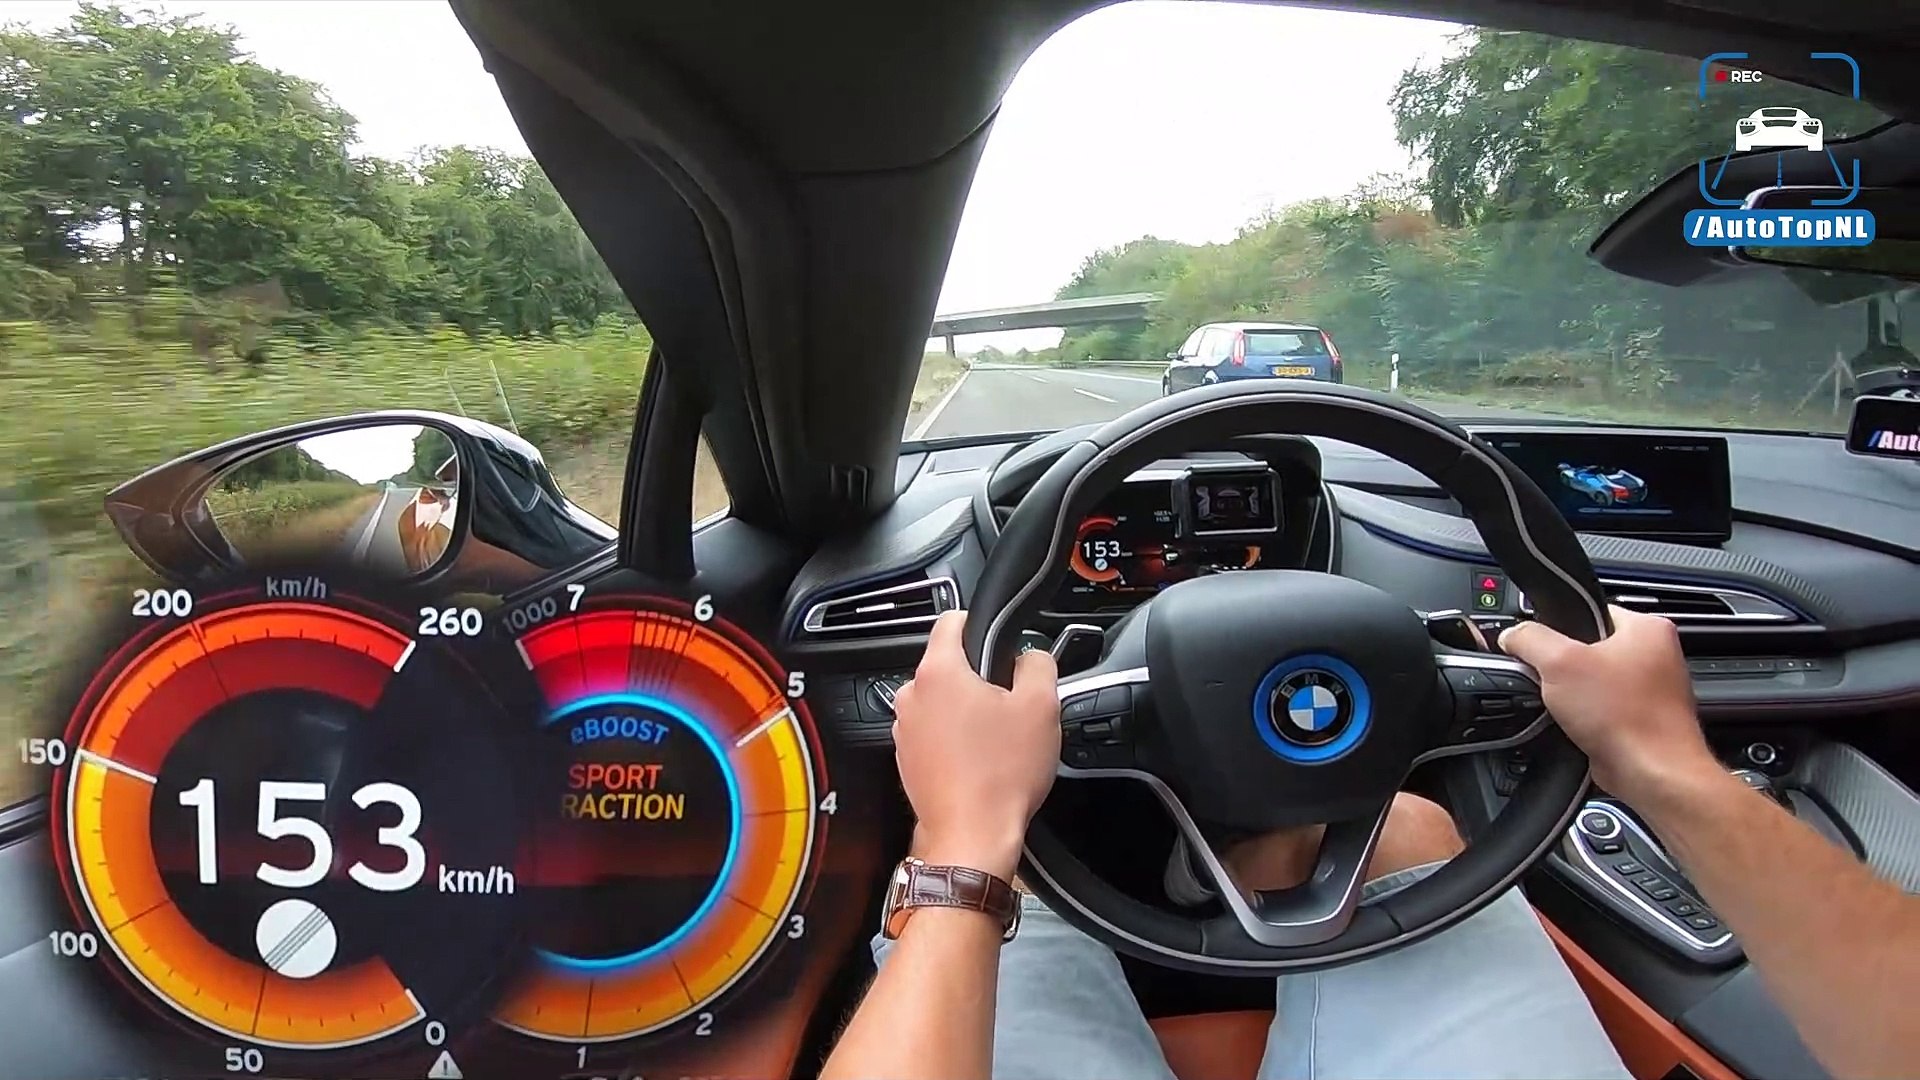 2020 BMW i8 TOP SPEED on AUTOBAHN (NO SPEED LIMIT) by AutoTopNL